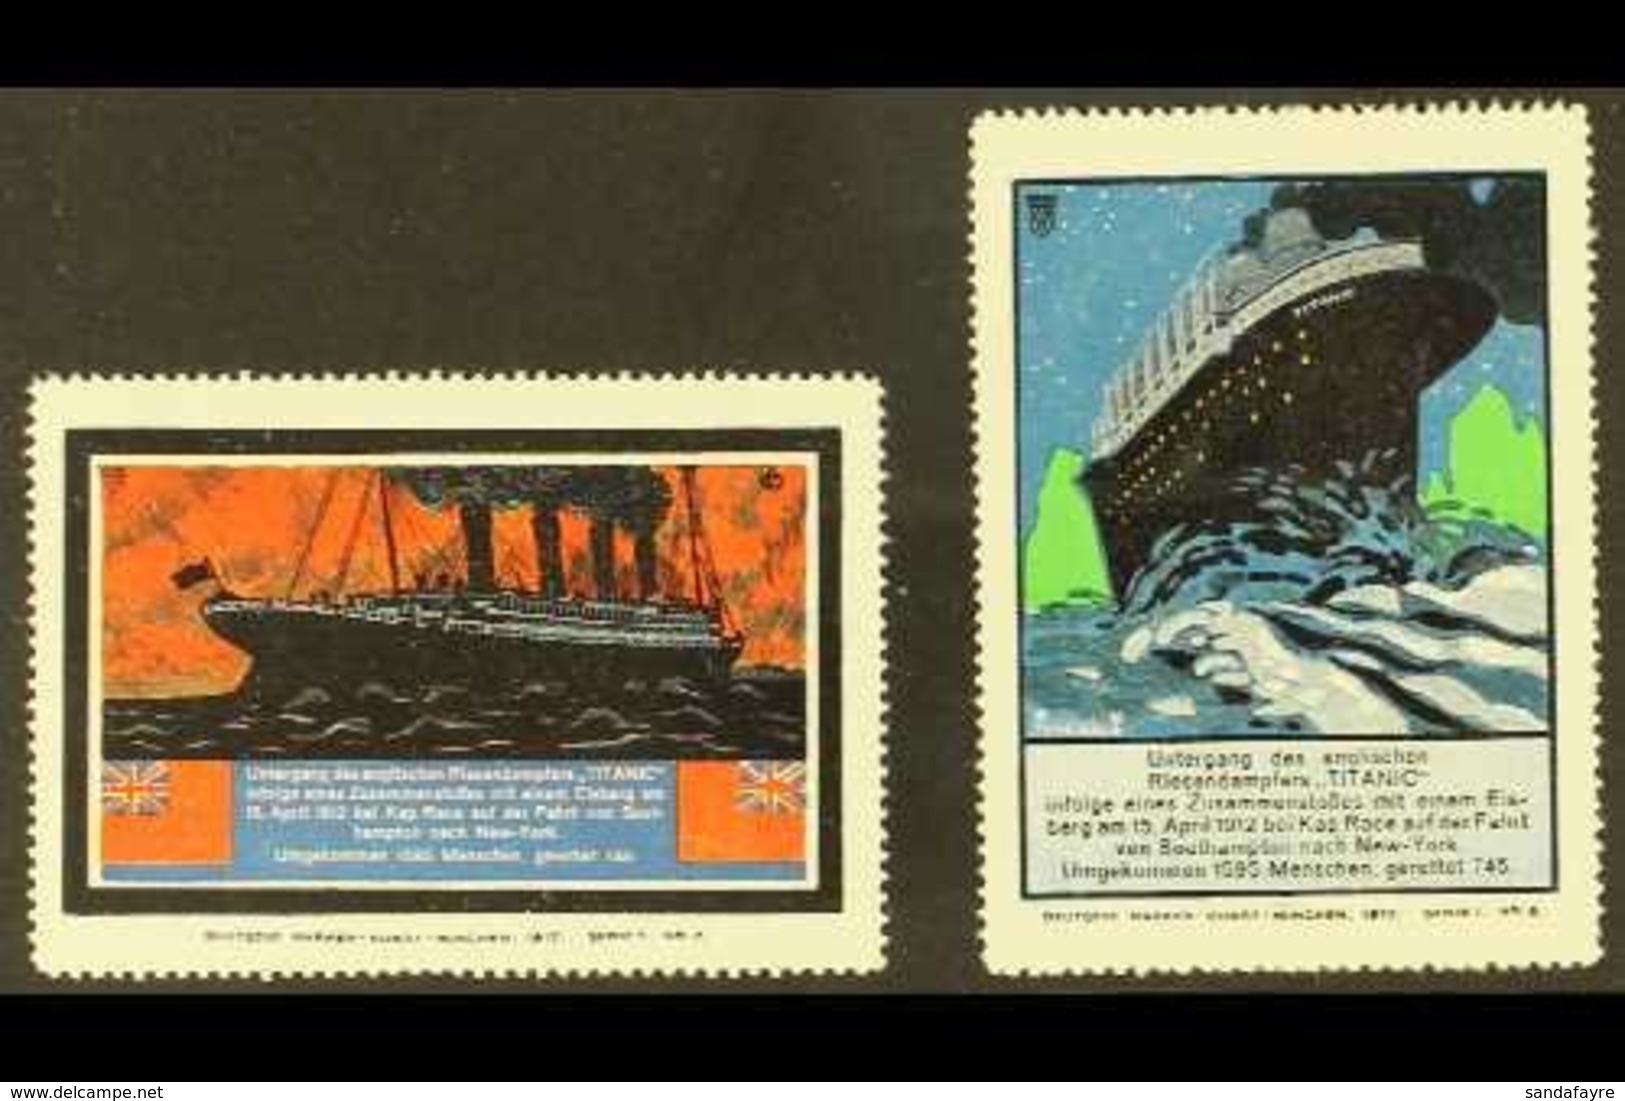 \Y TITANIC\Y Germany 1912 Poster Stamps, Two Different Depicting Dramatic Illustrations Of RMS Titanic With Text In Germ - Unclassified